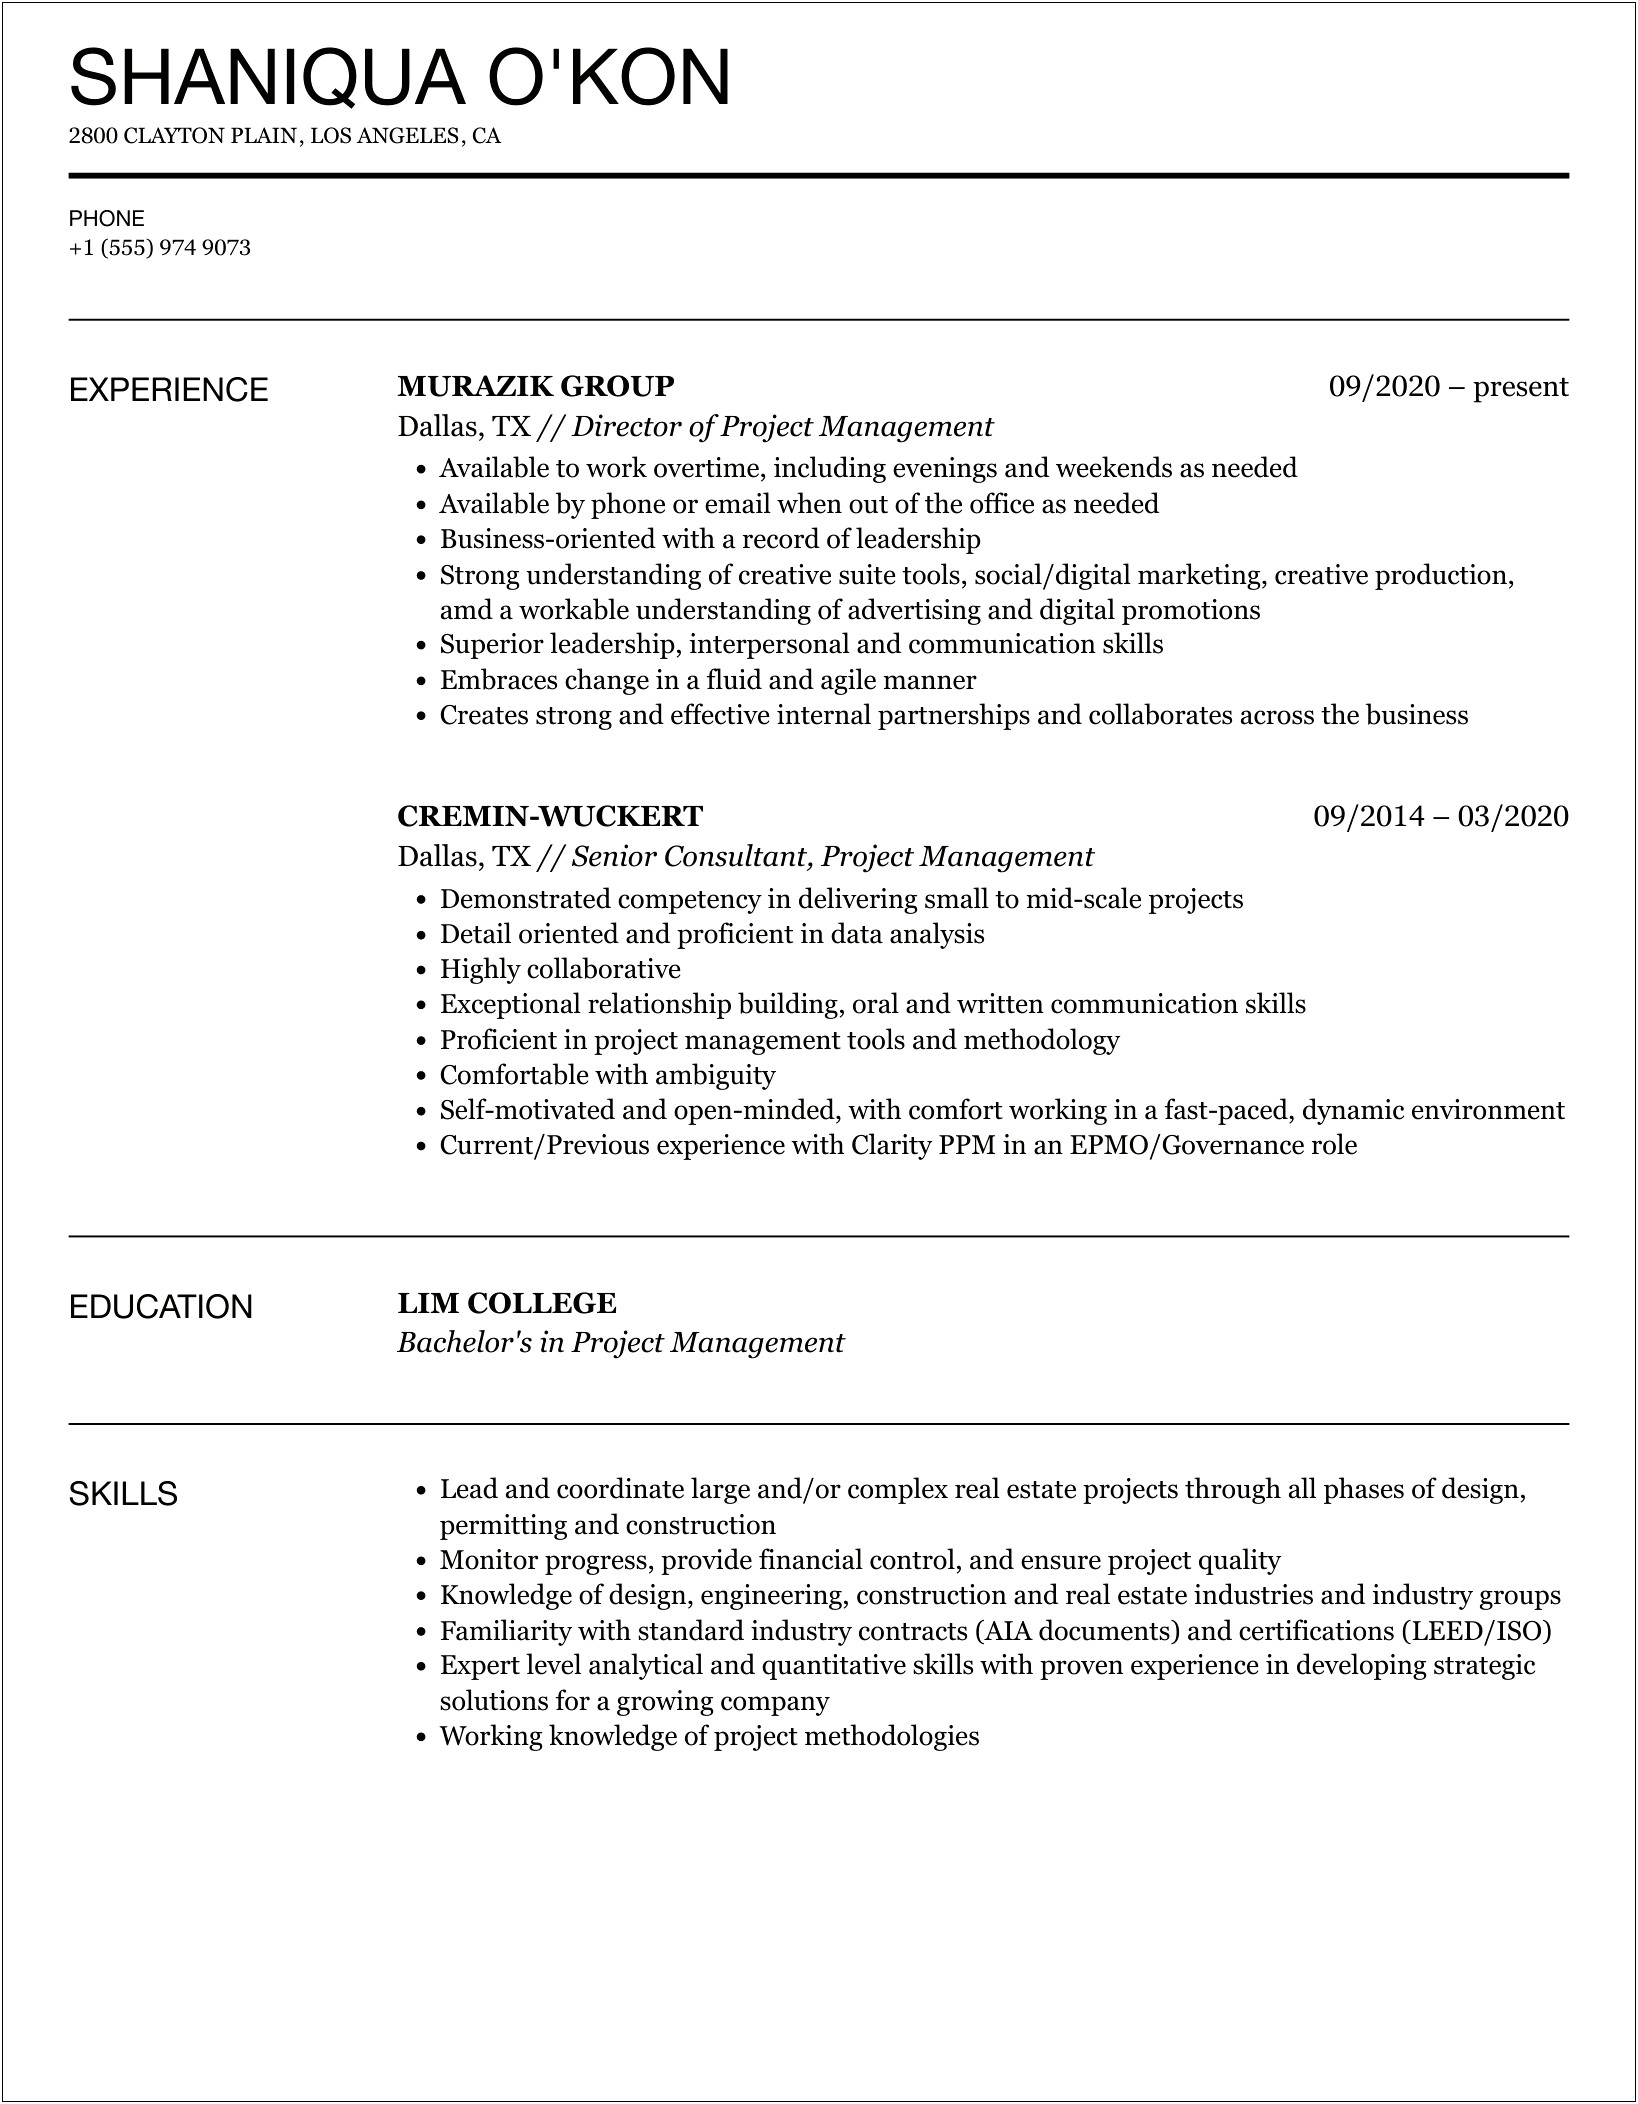 Resume Skills For A Project Manager At Innovaris